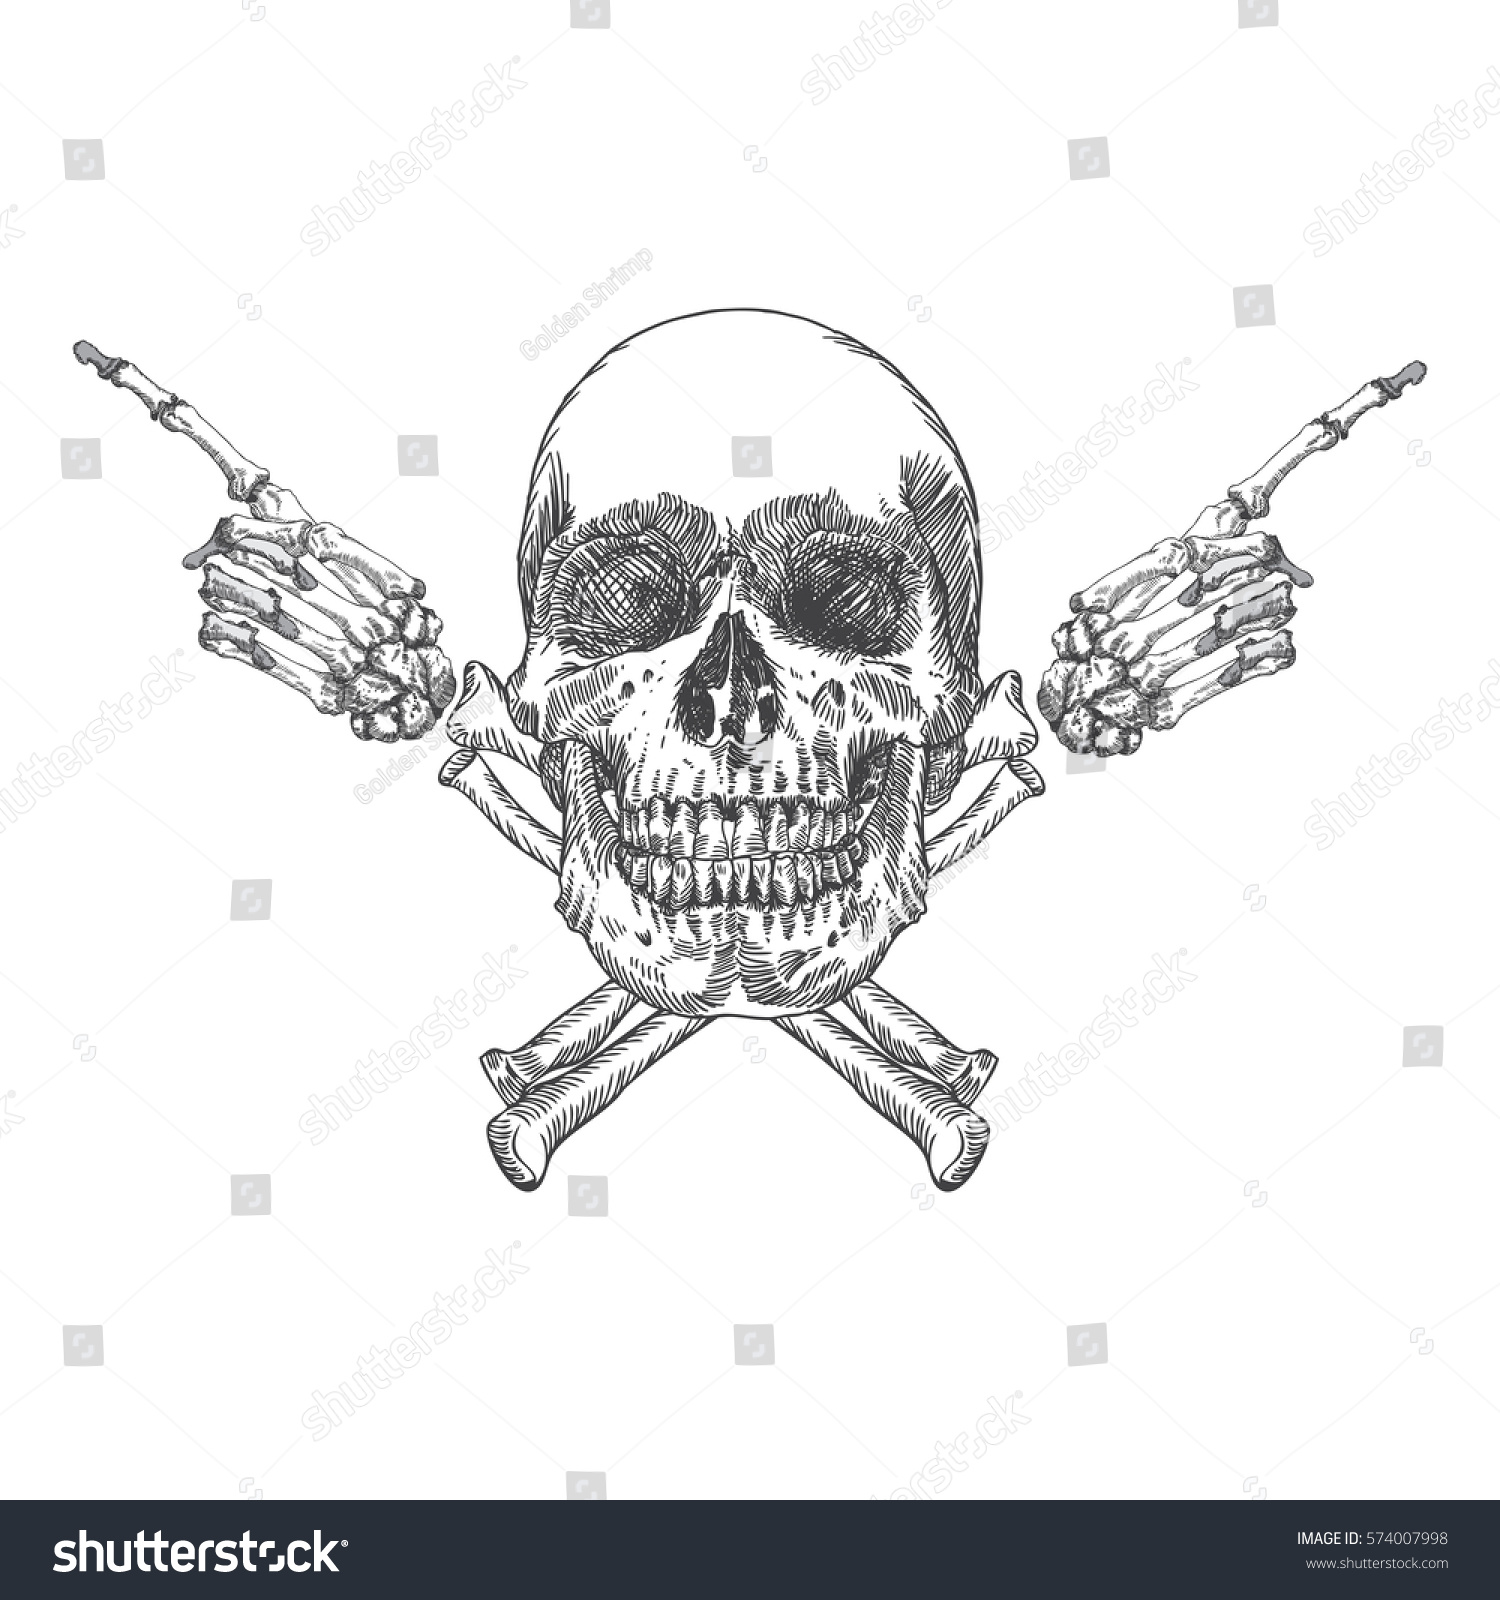 Wave hands with skull and crossbones